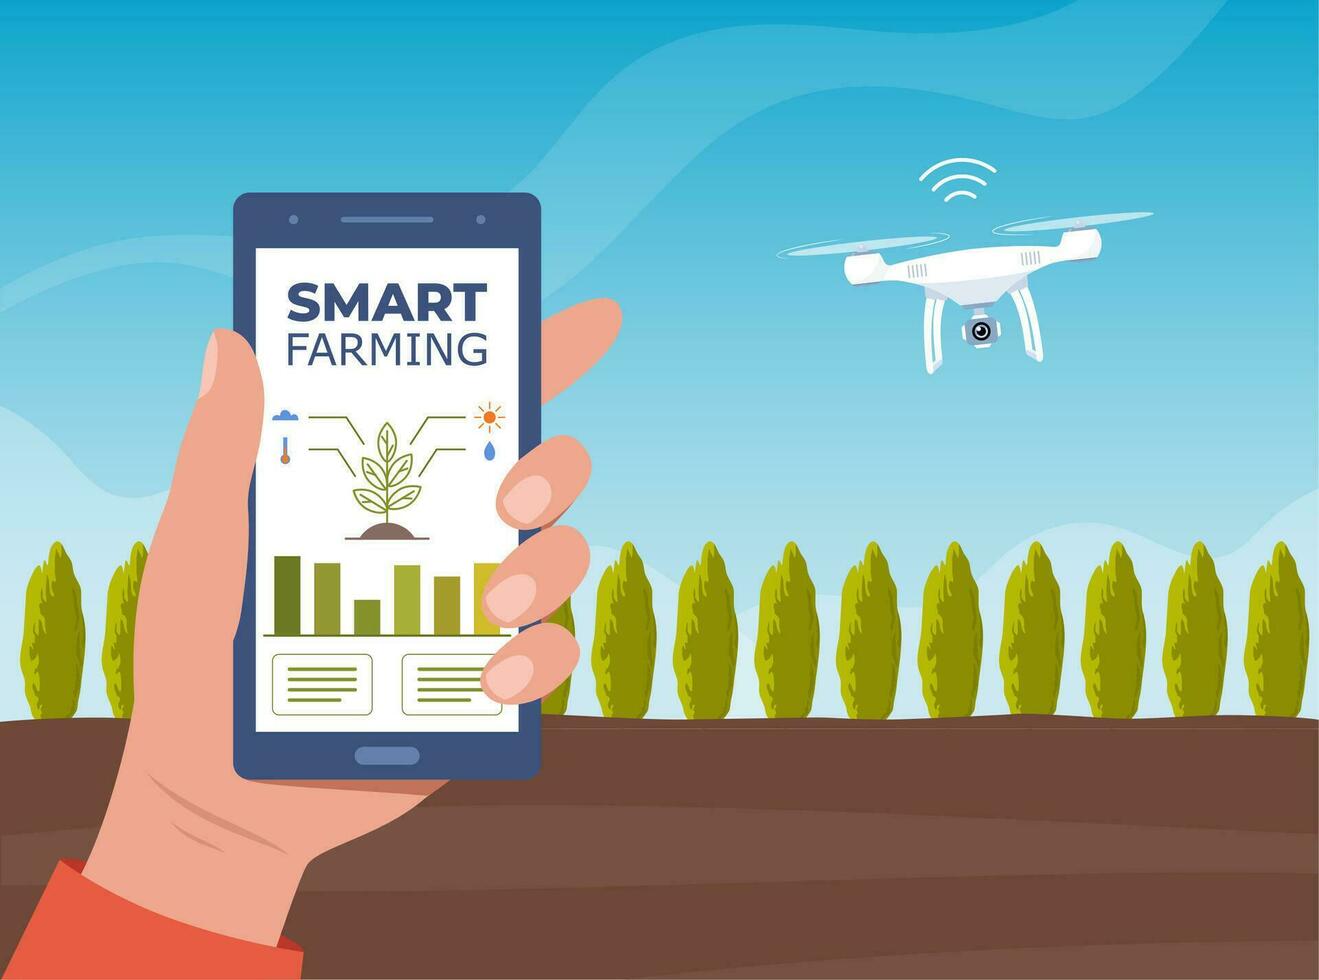 Smart farming, futuristic technologies in farm industry. Smartphone with app for control plants growing, drone, agricultural automation. Beds with agricultural crops. Vector illustration.